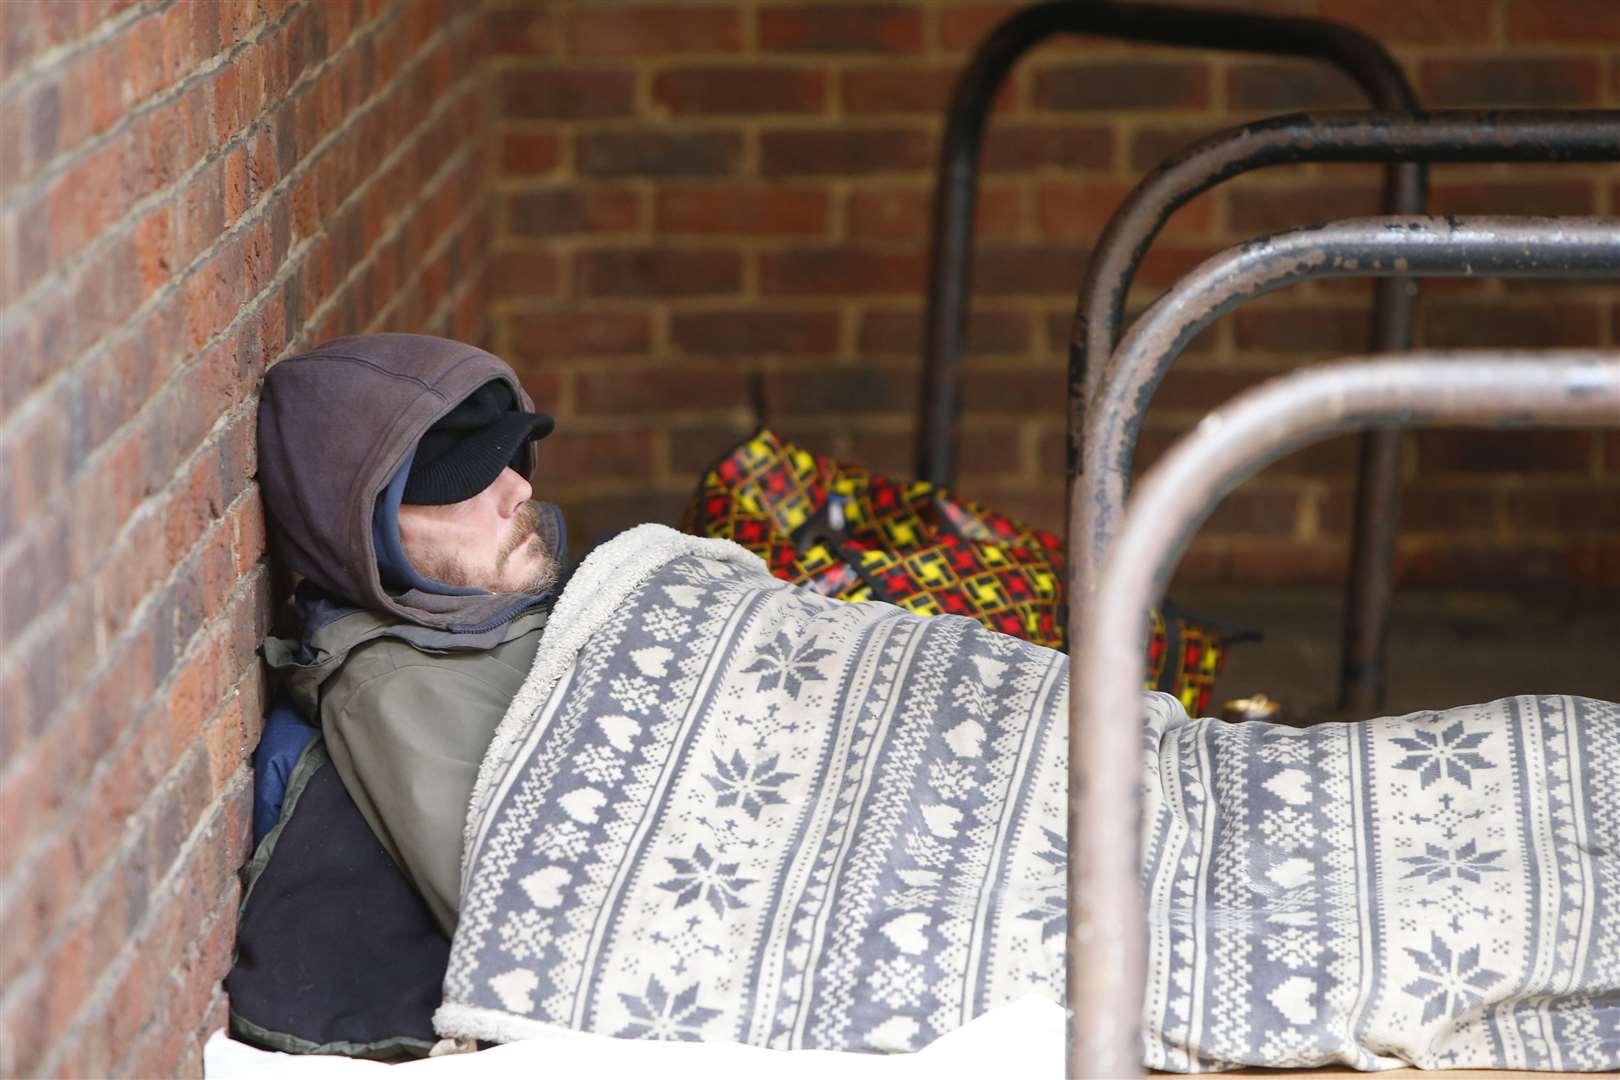 At the last count, Maidstone had only two rough sleepers